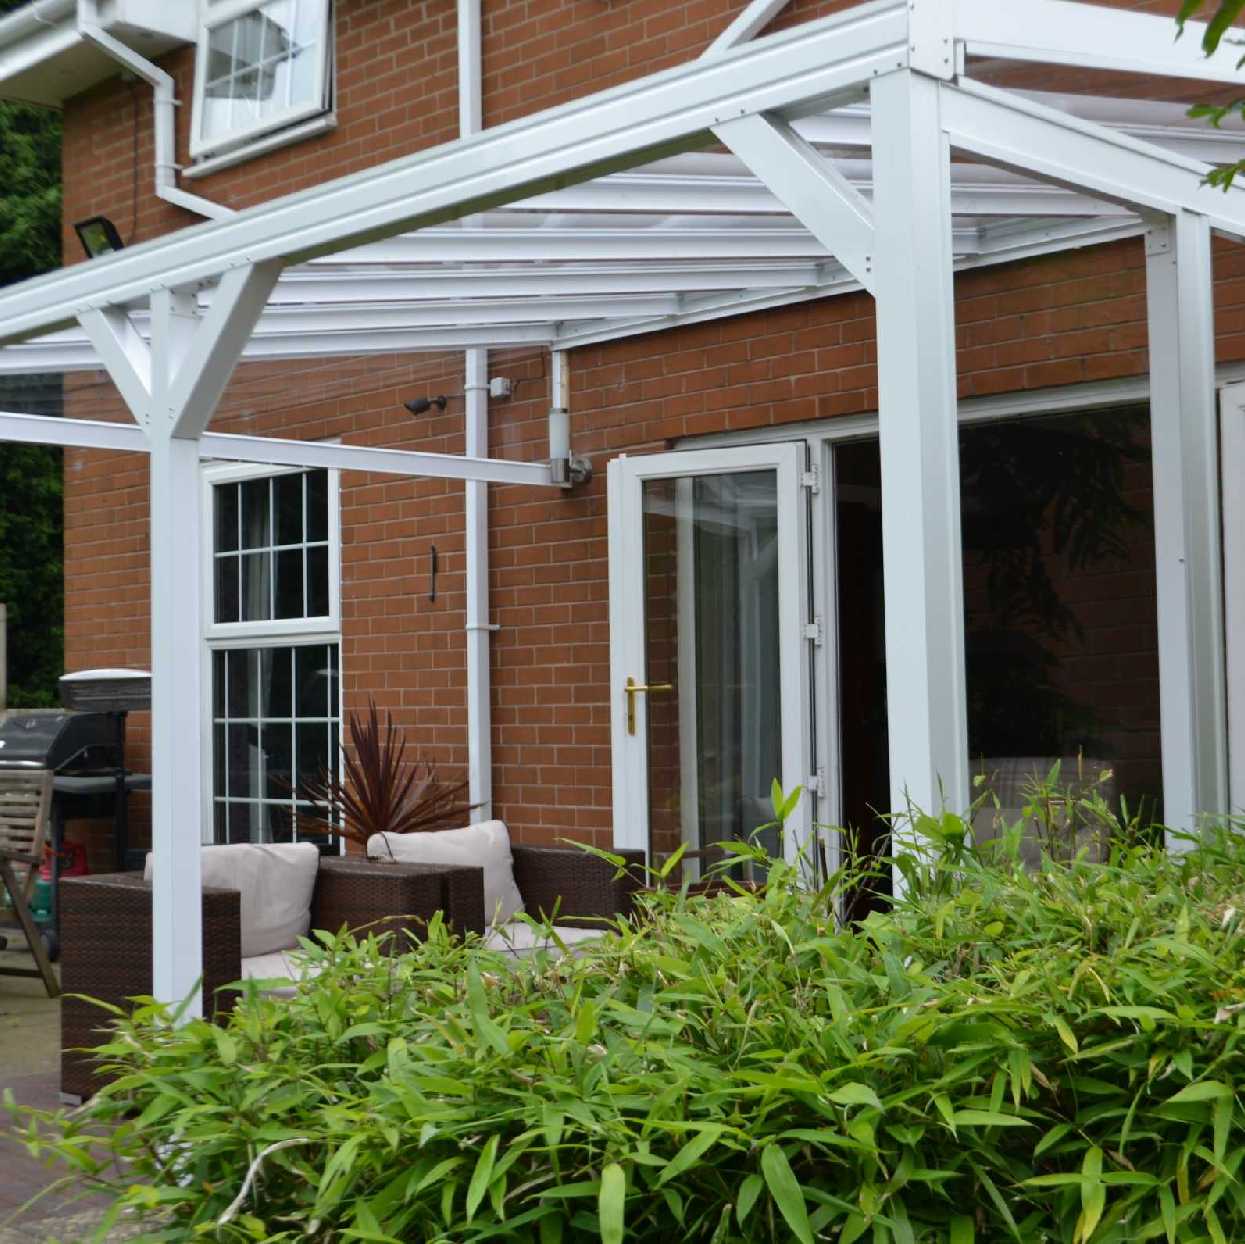 Omega Smart Lean-To Canopy, White with 6mm Glass Clear Plate Polycarbonate Glazing - 2.8m (W) x 2.5m (P), (2) Supporting Posts from Omega Build